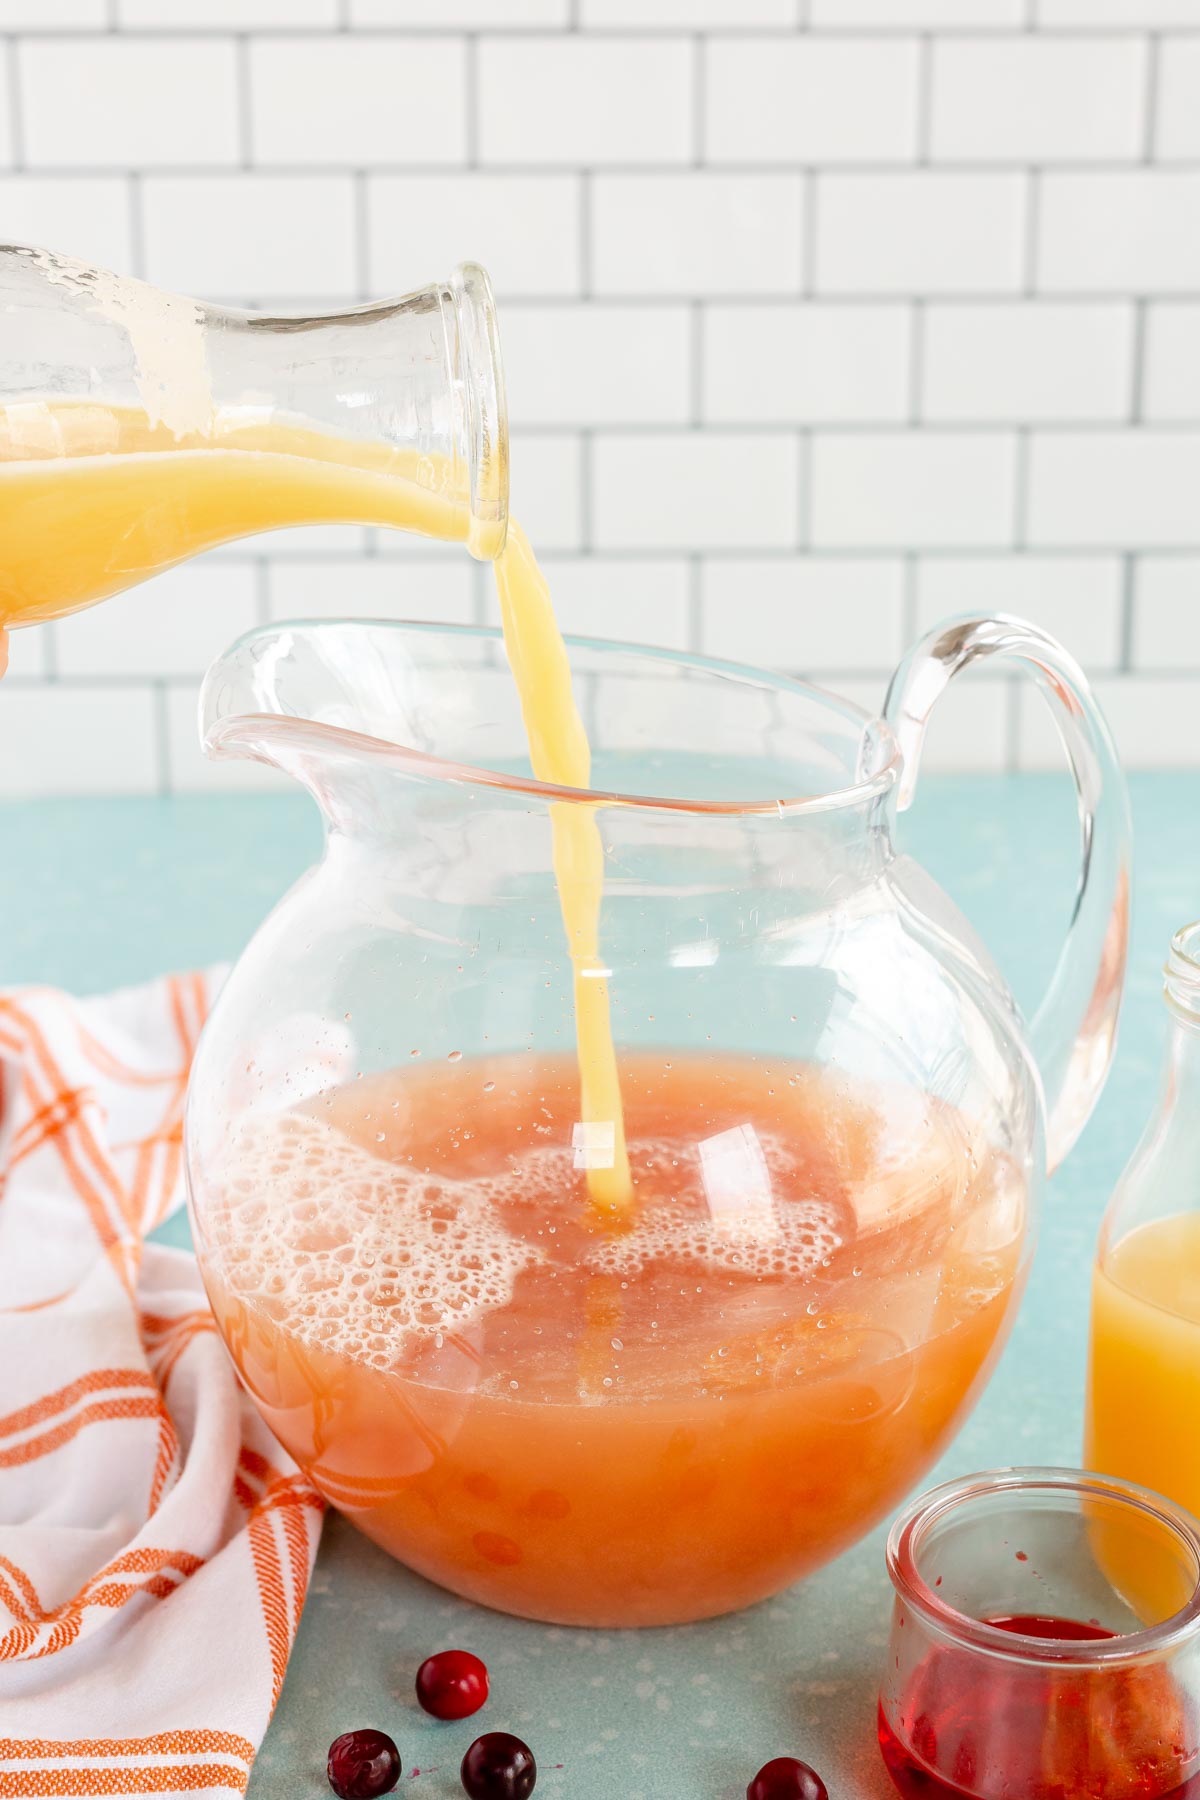 pouring orange juice into a glass pitcher